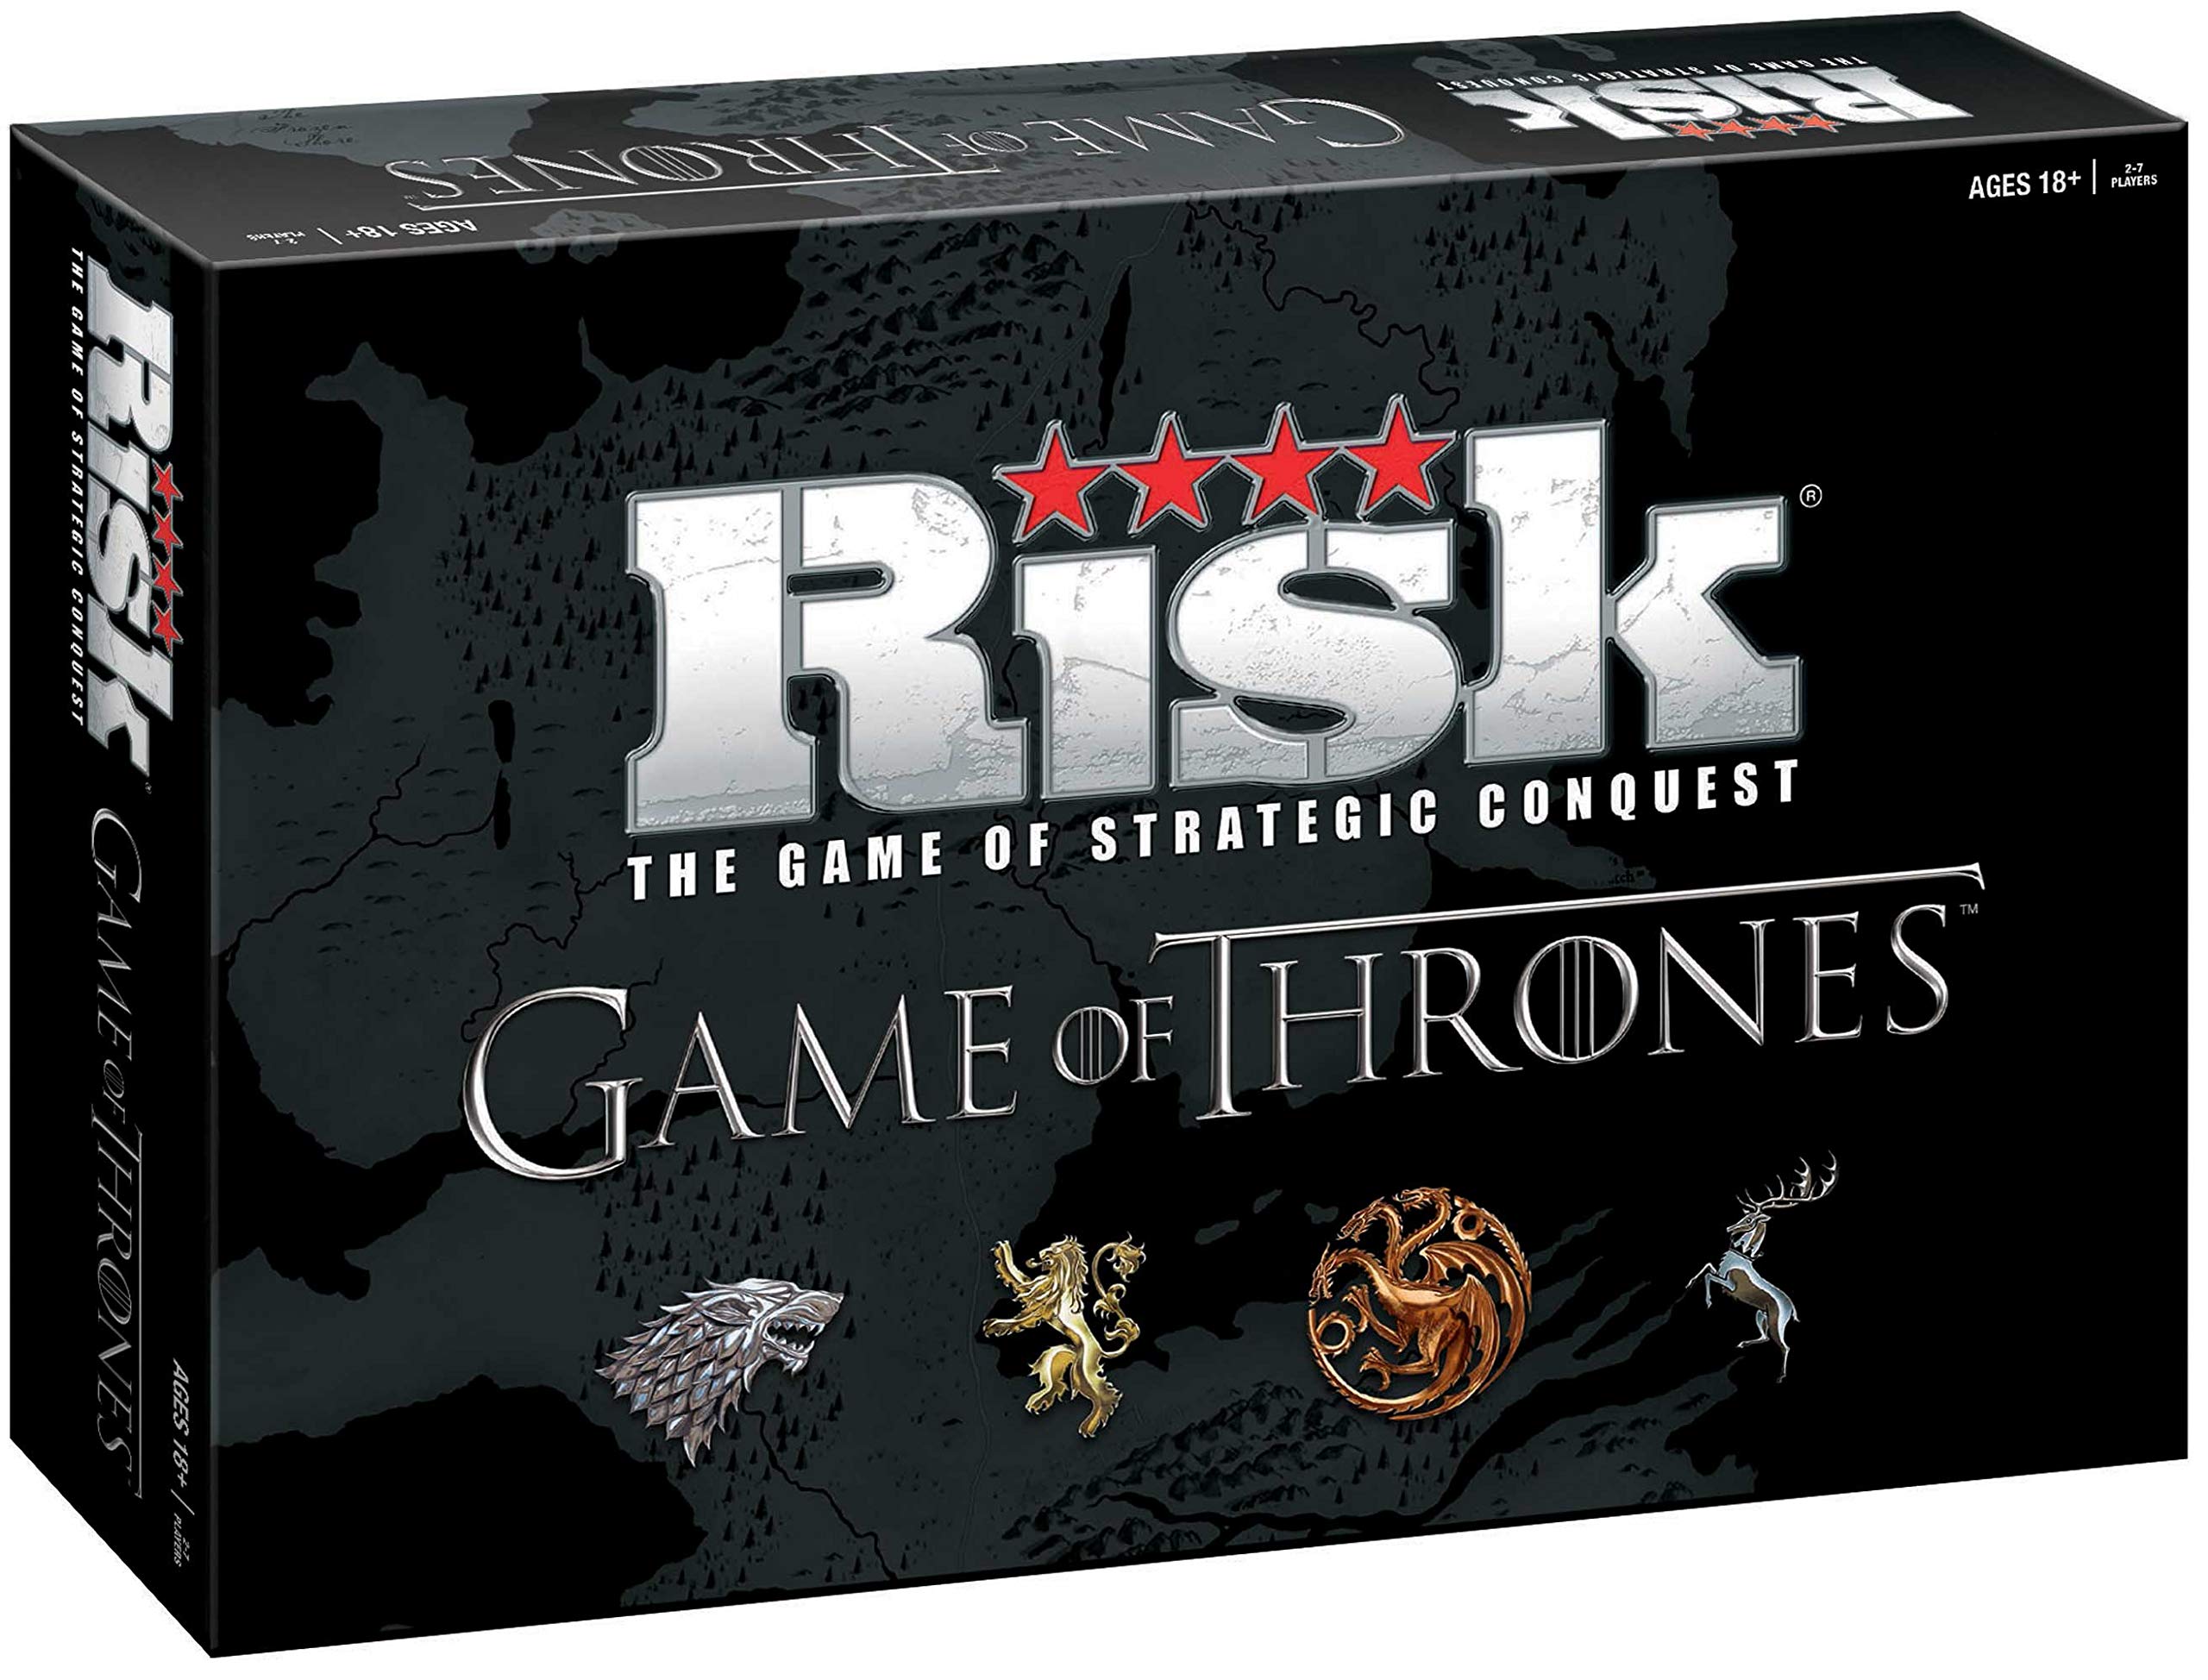 USAOPOLY Risk Game of Thrones Strategy Board Game |for Game of Thrones Fans | Official Merchandise | Based on The TV Show on HBO | Themed Game